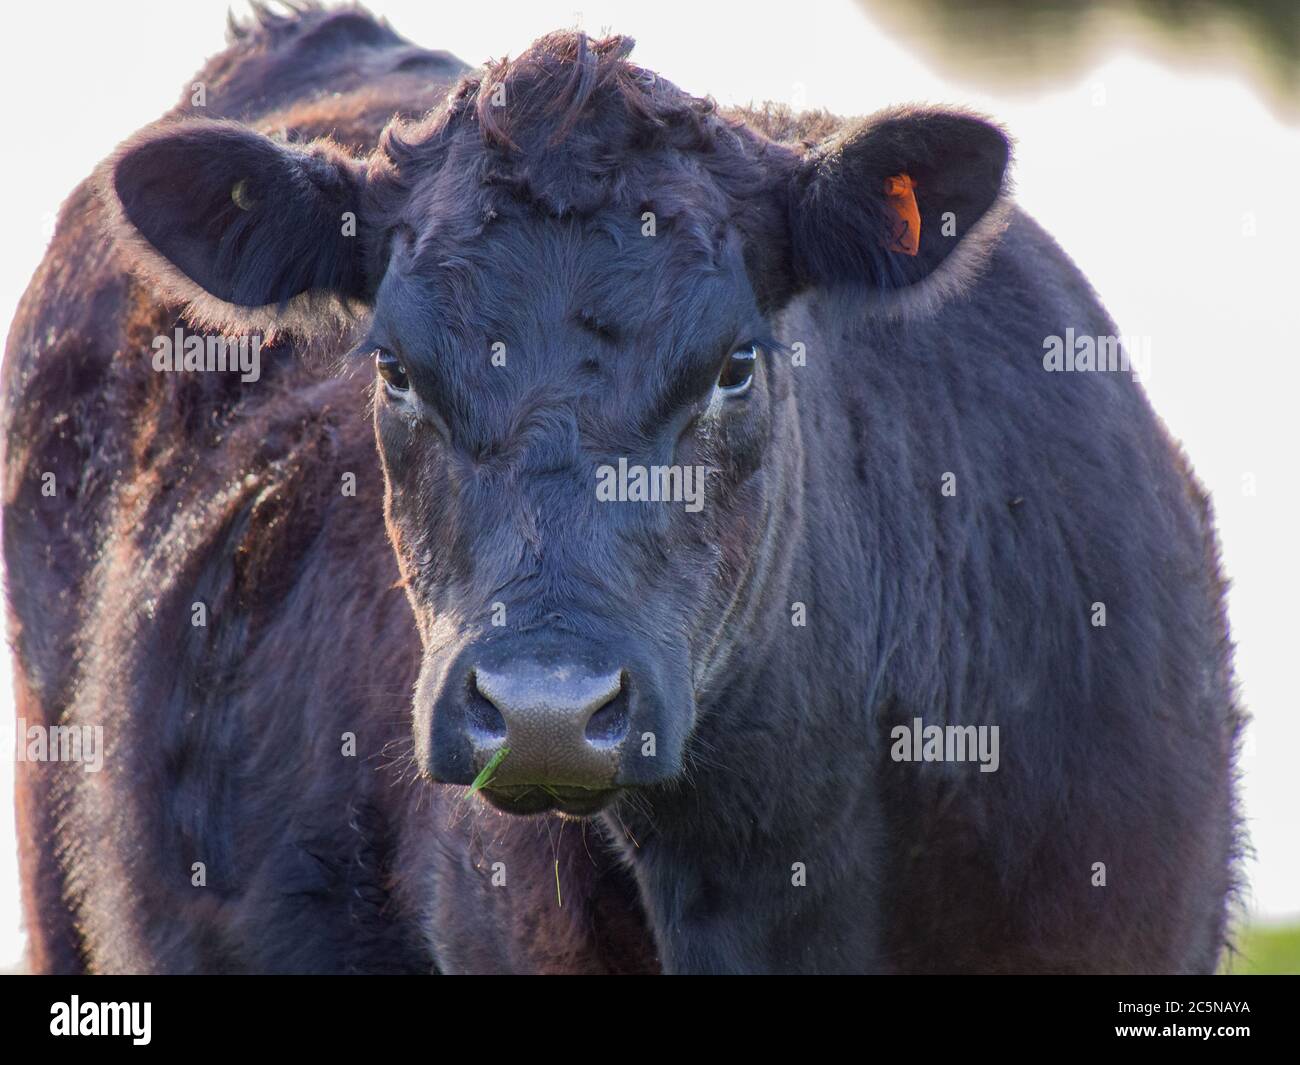 A Black Angus Beef Cow in a pasture Stock Photo